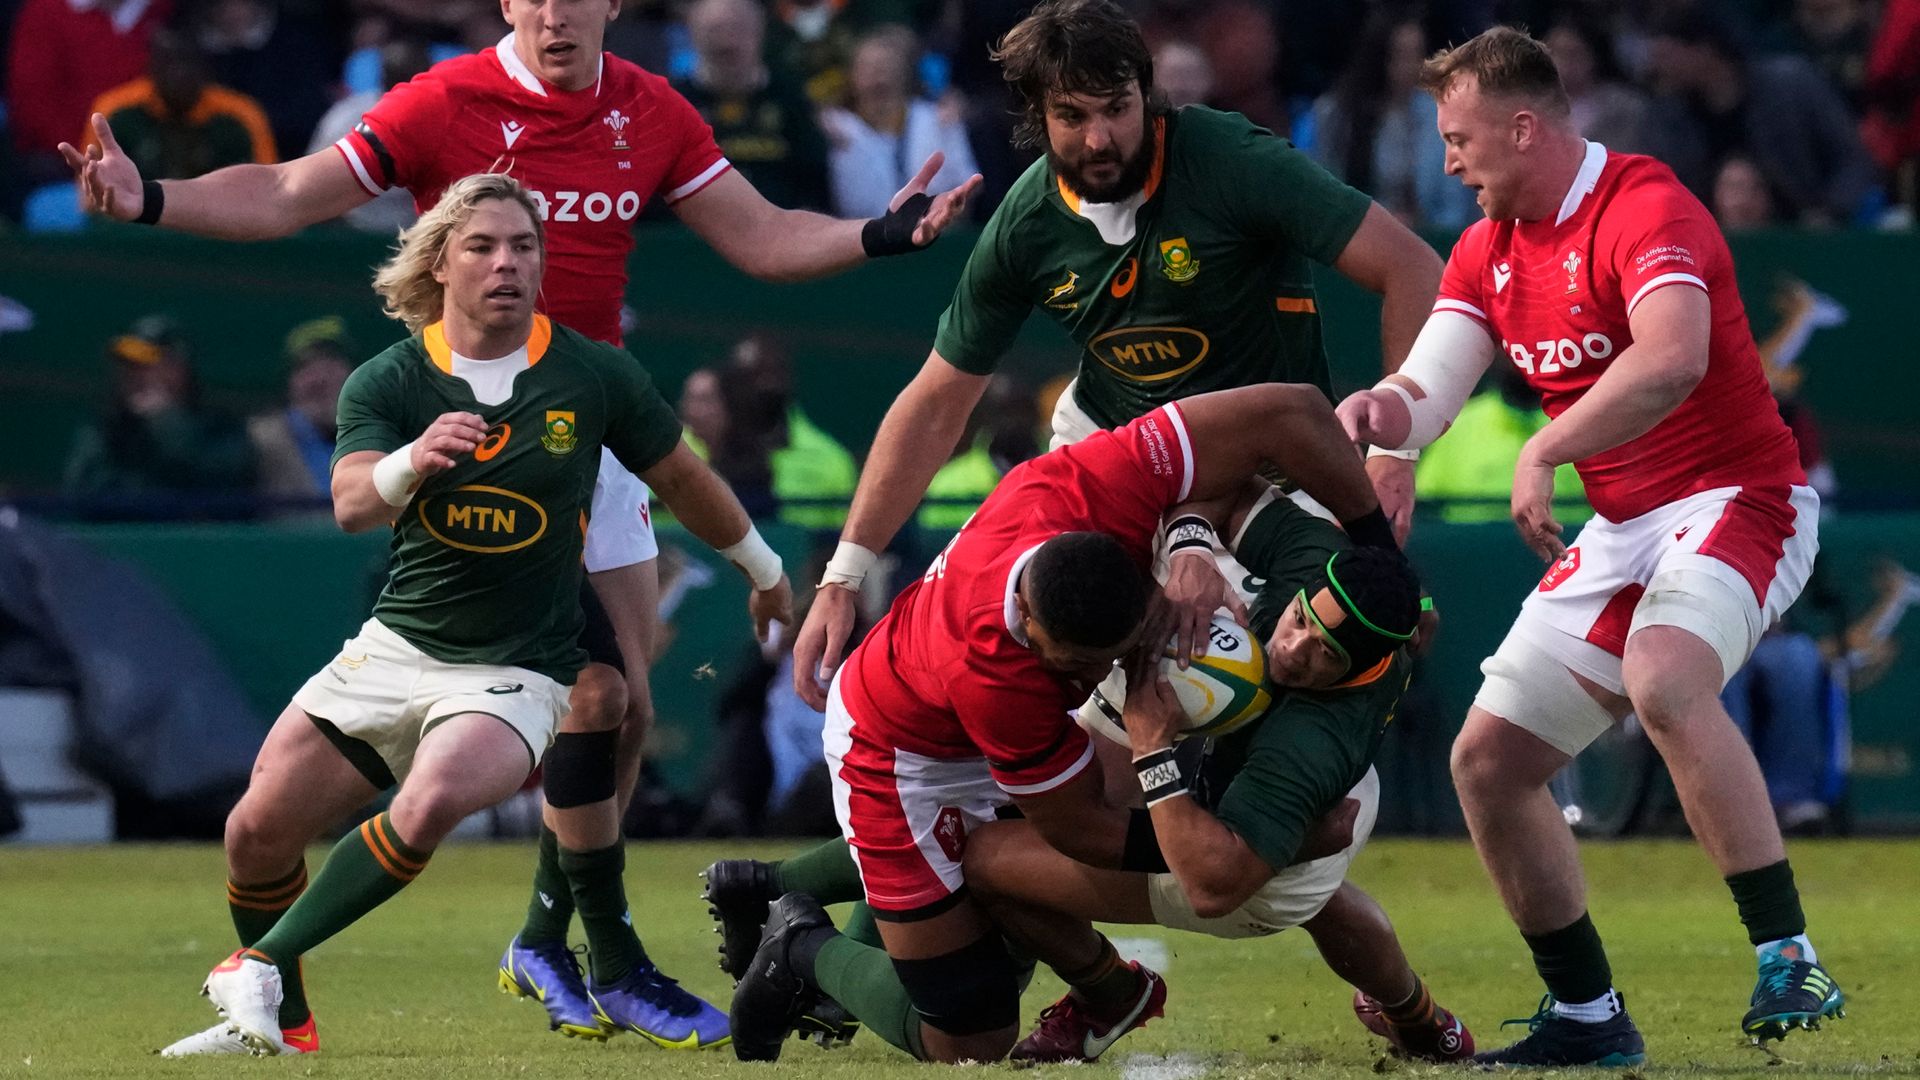 Late SA penalty denies Wales in dramatic first Test